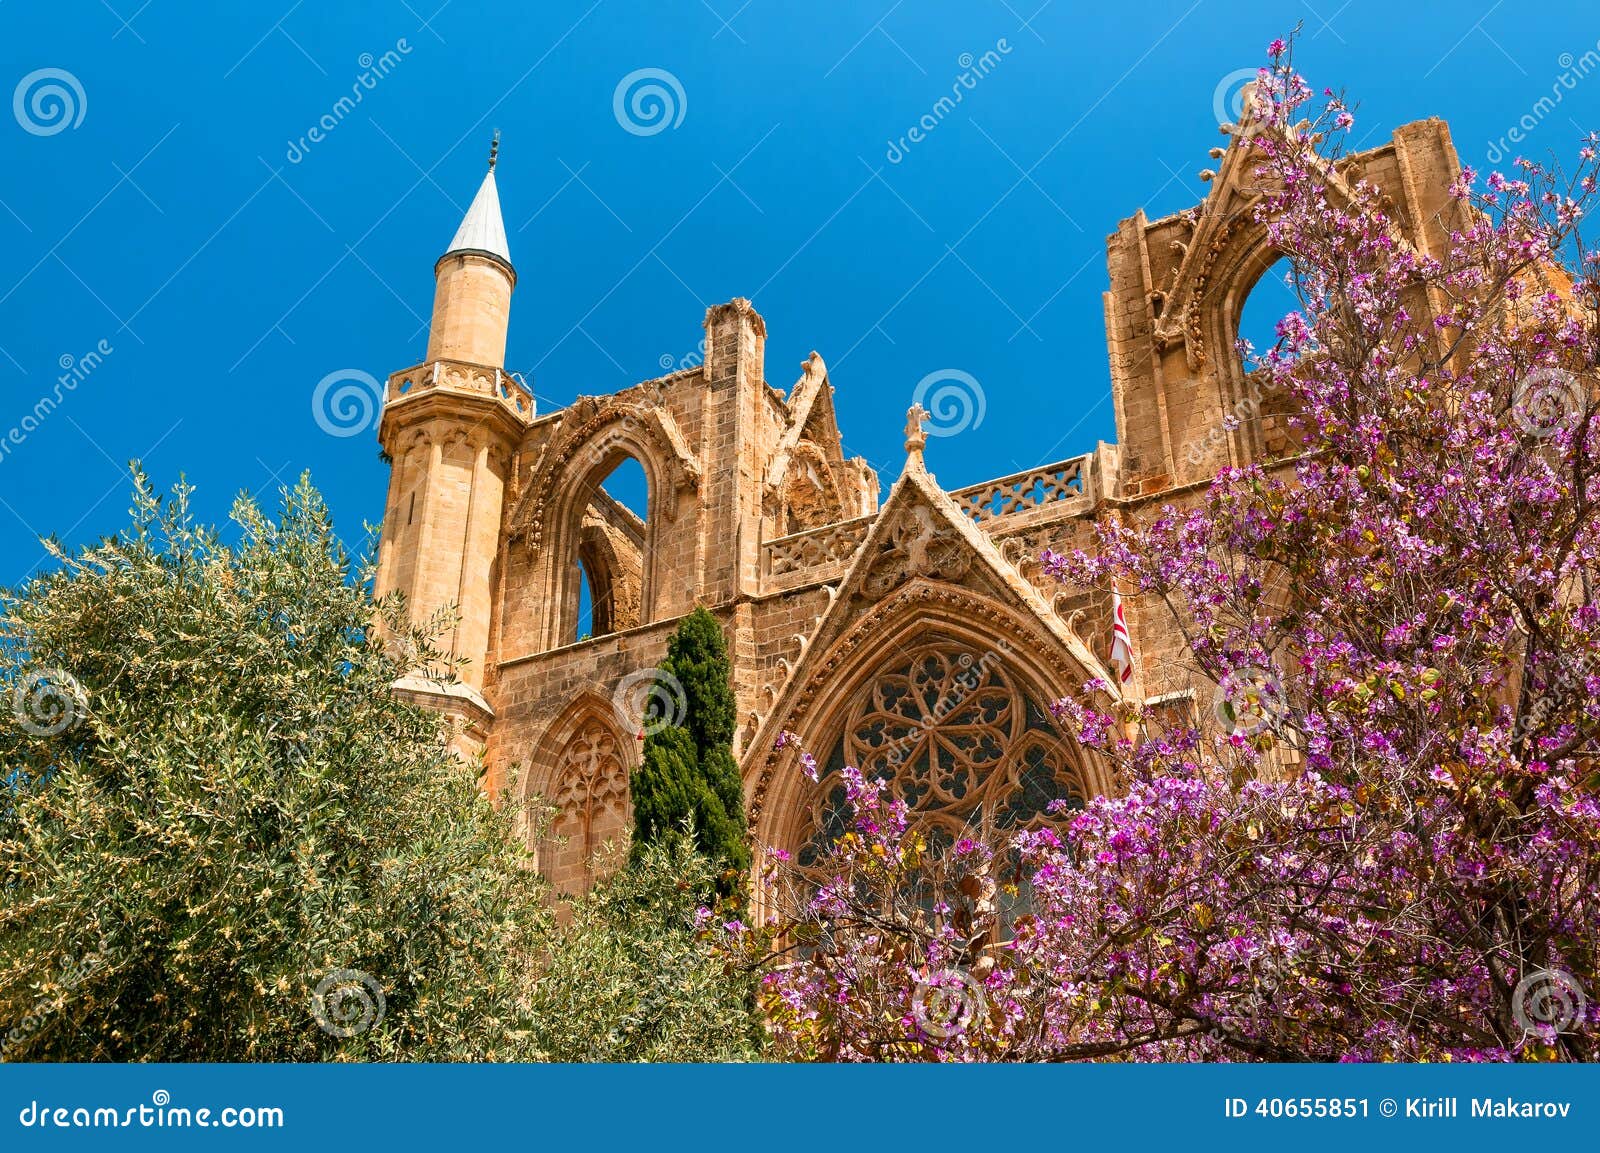 st. nicholas cathedral, formerly lala mustafa mosque. famagusta, cyprus